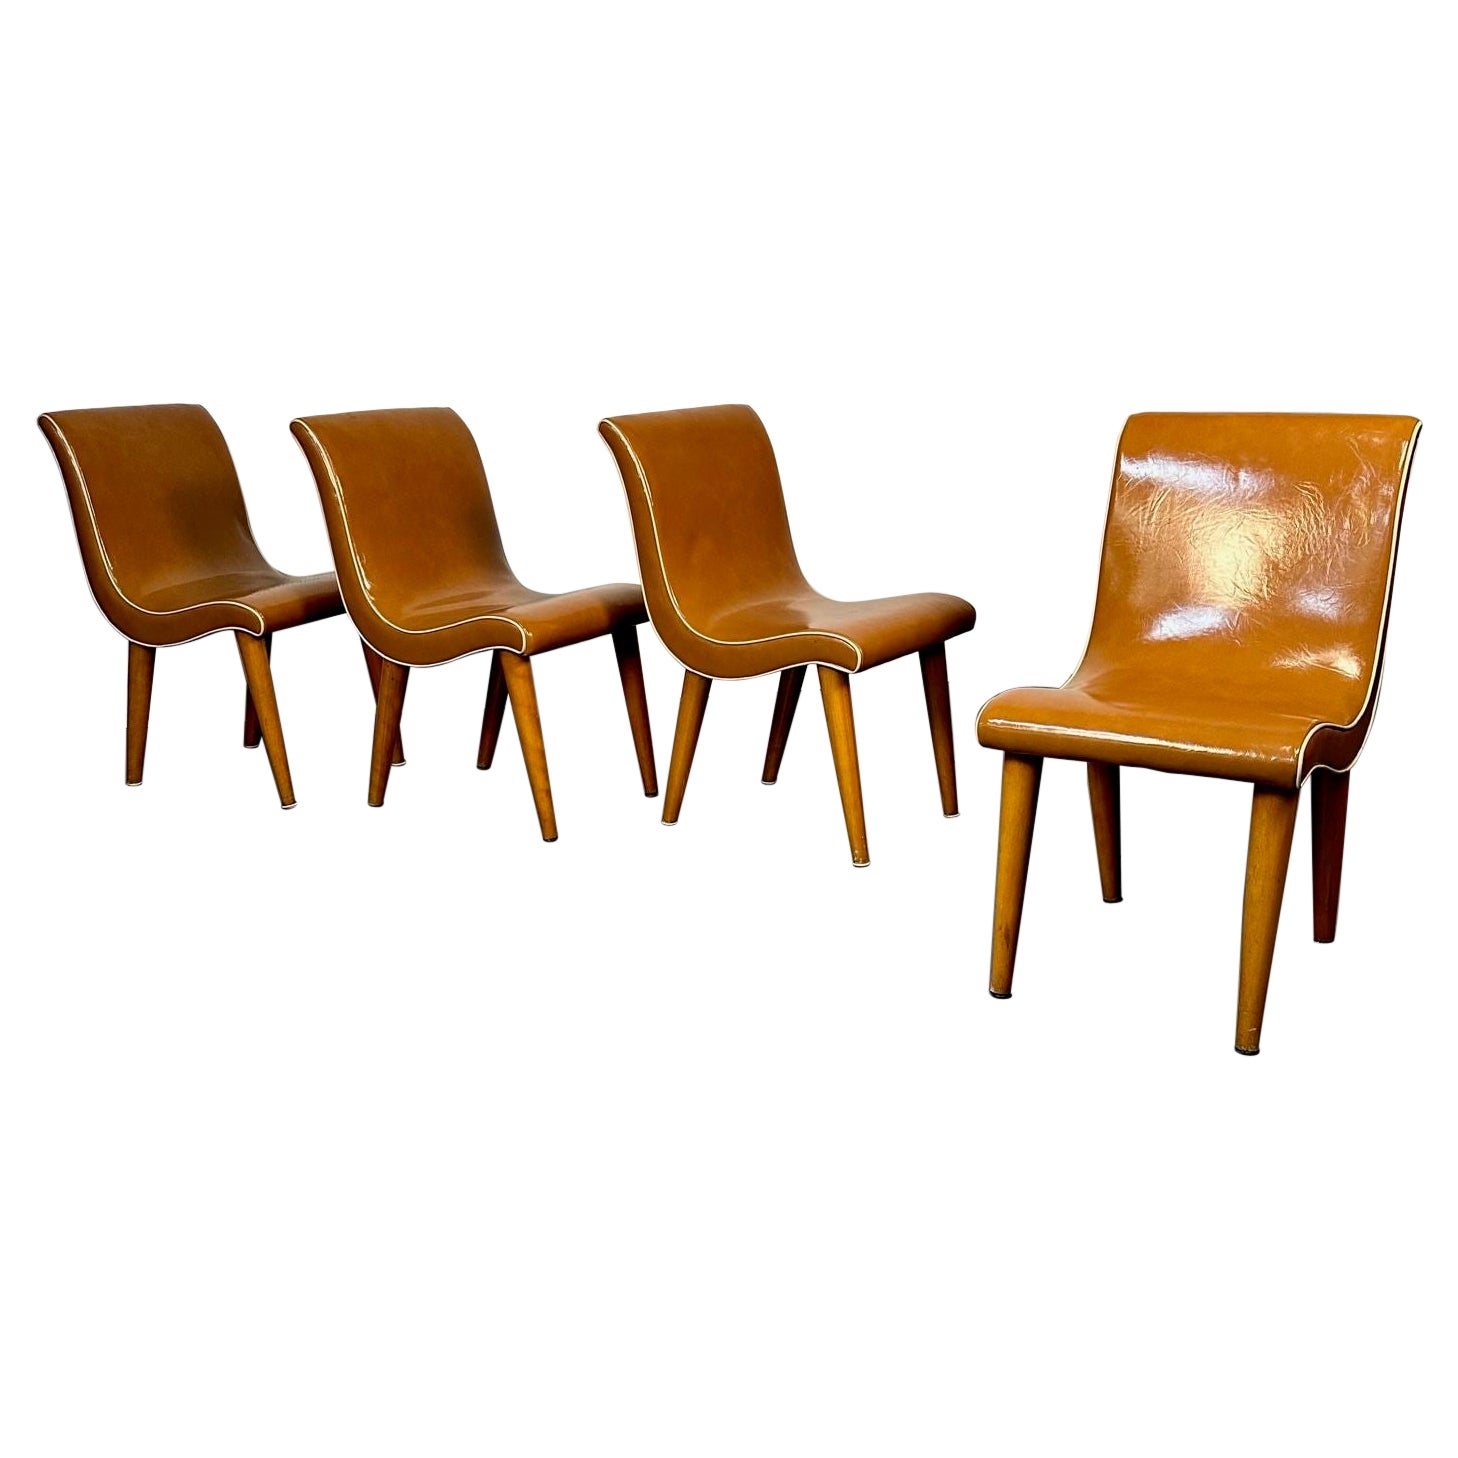 Four American Mid-Century Modern Curvy Dining / Side Chairs by Russel Wright For Sale